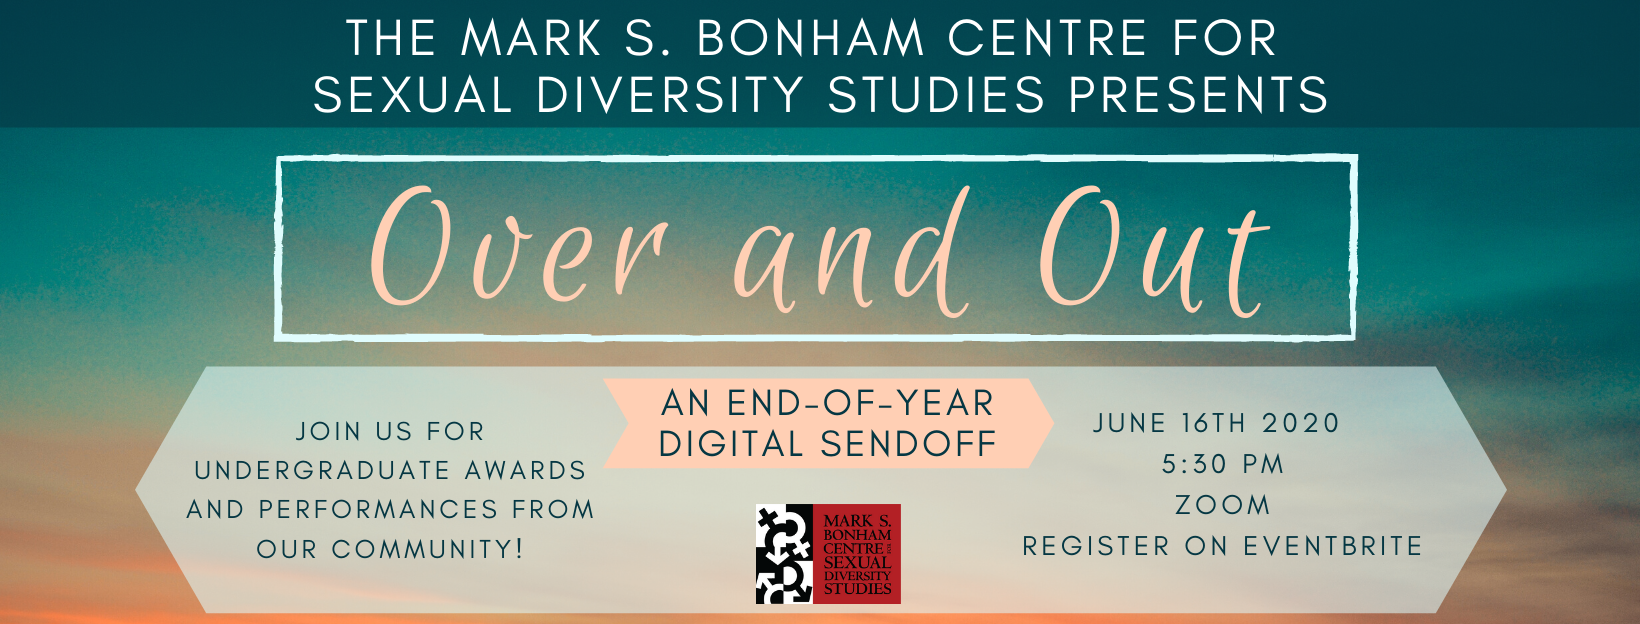 Sexual Diversity Studies: Over and Out | End-of-Year Digital Sendoff